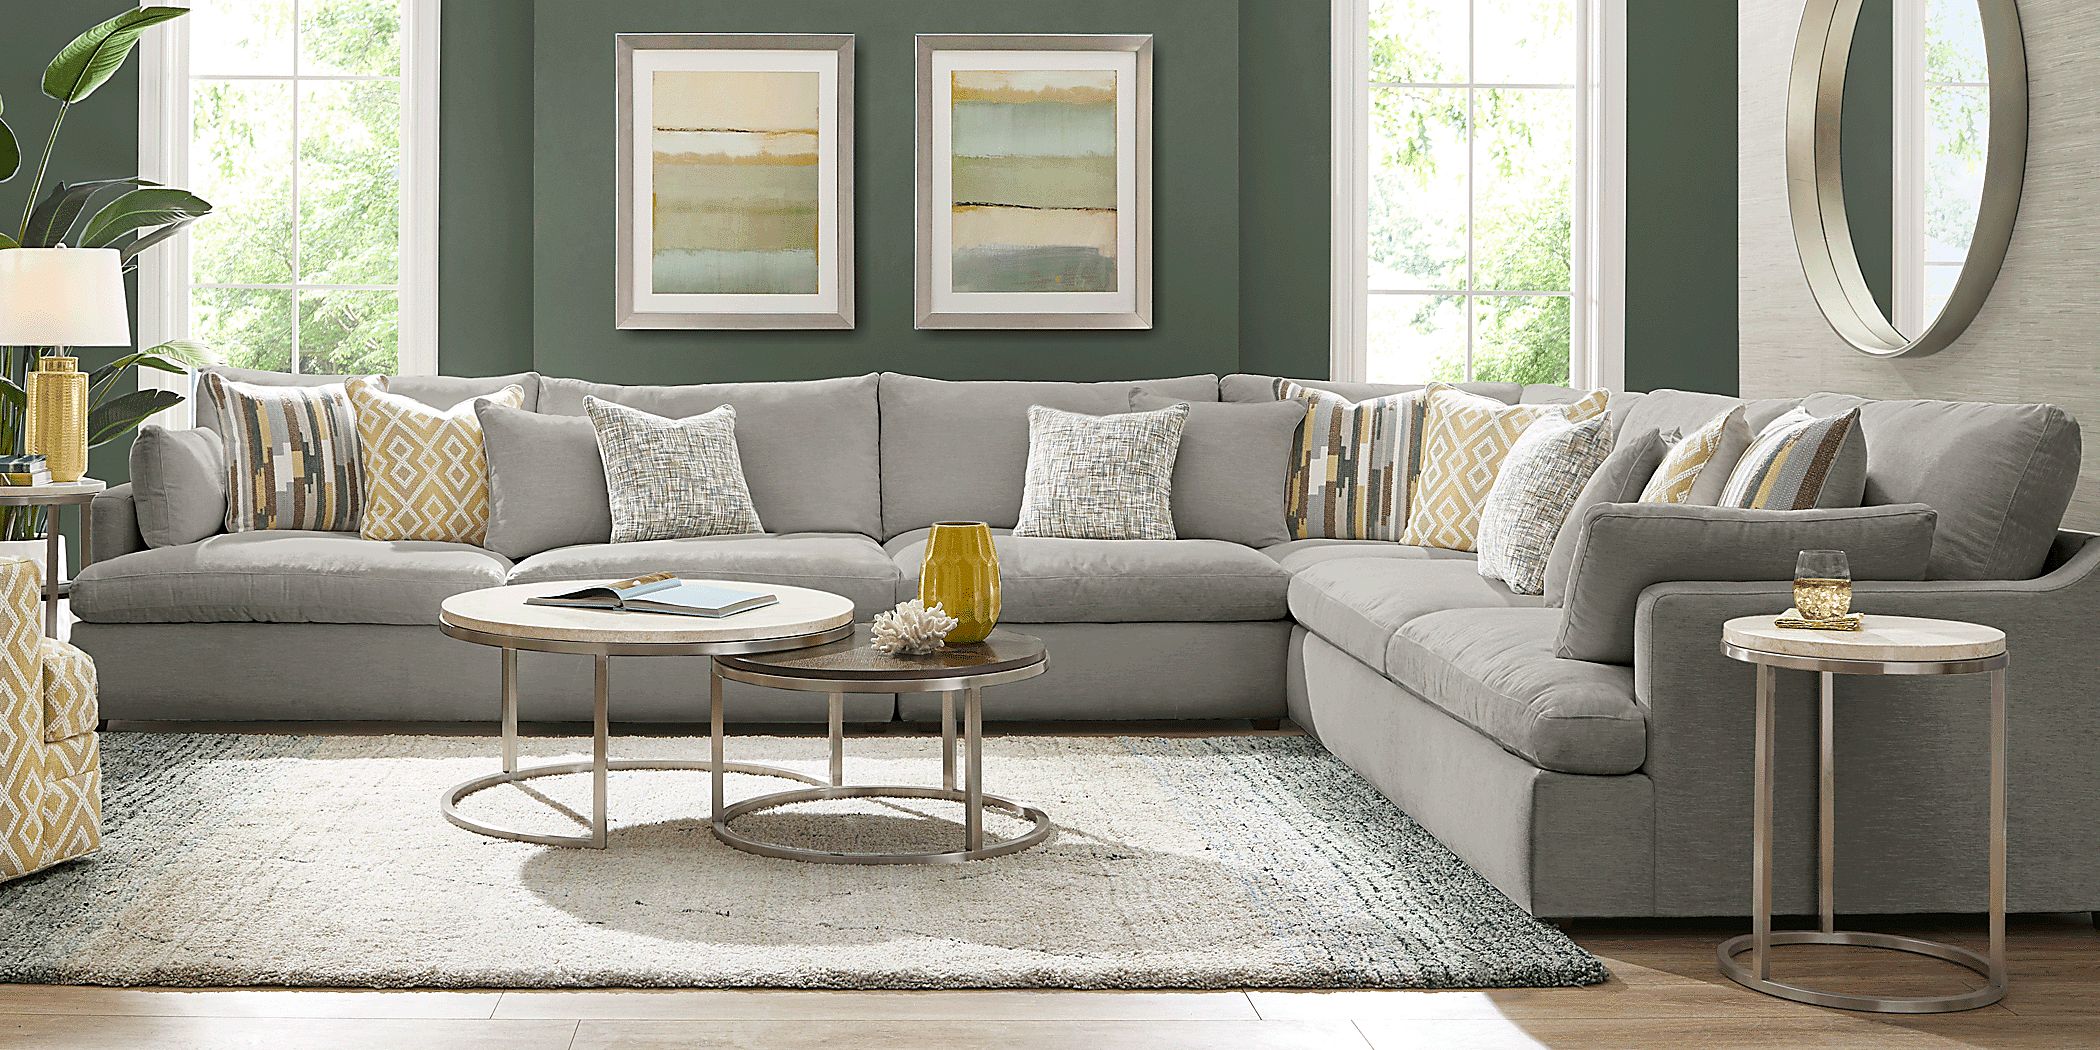 Cindy Crawford Home Aldon Park Gray 4 Pc Sectional